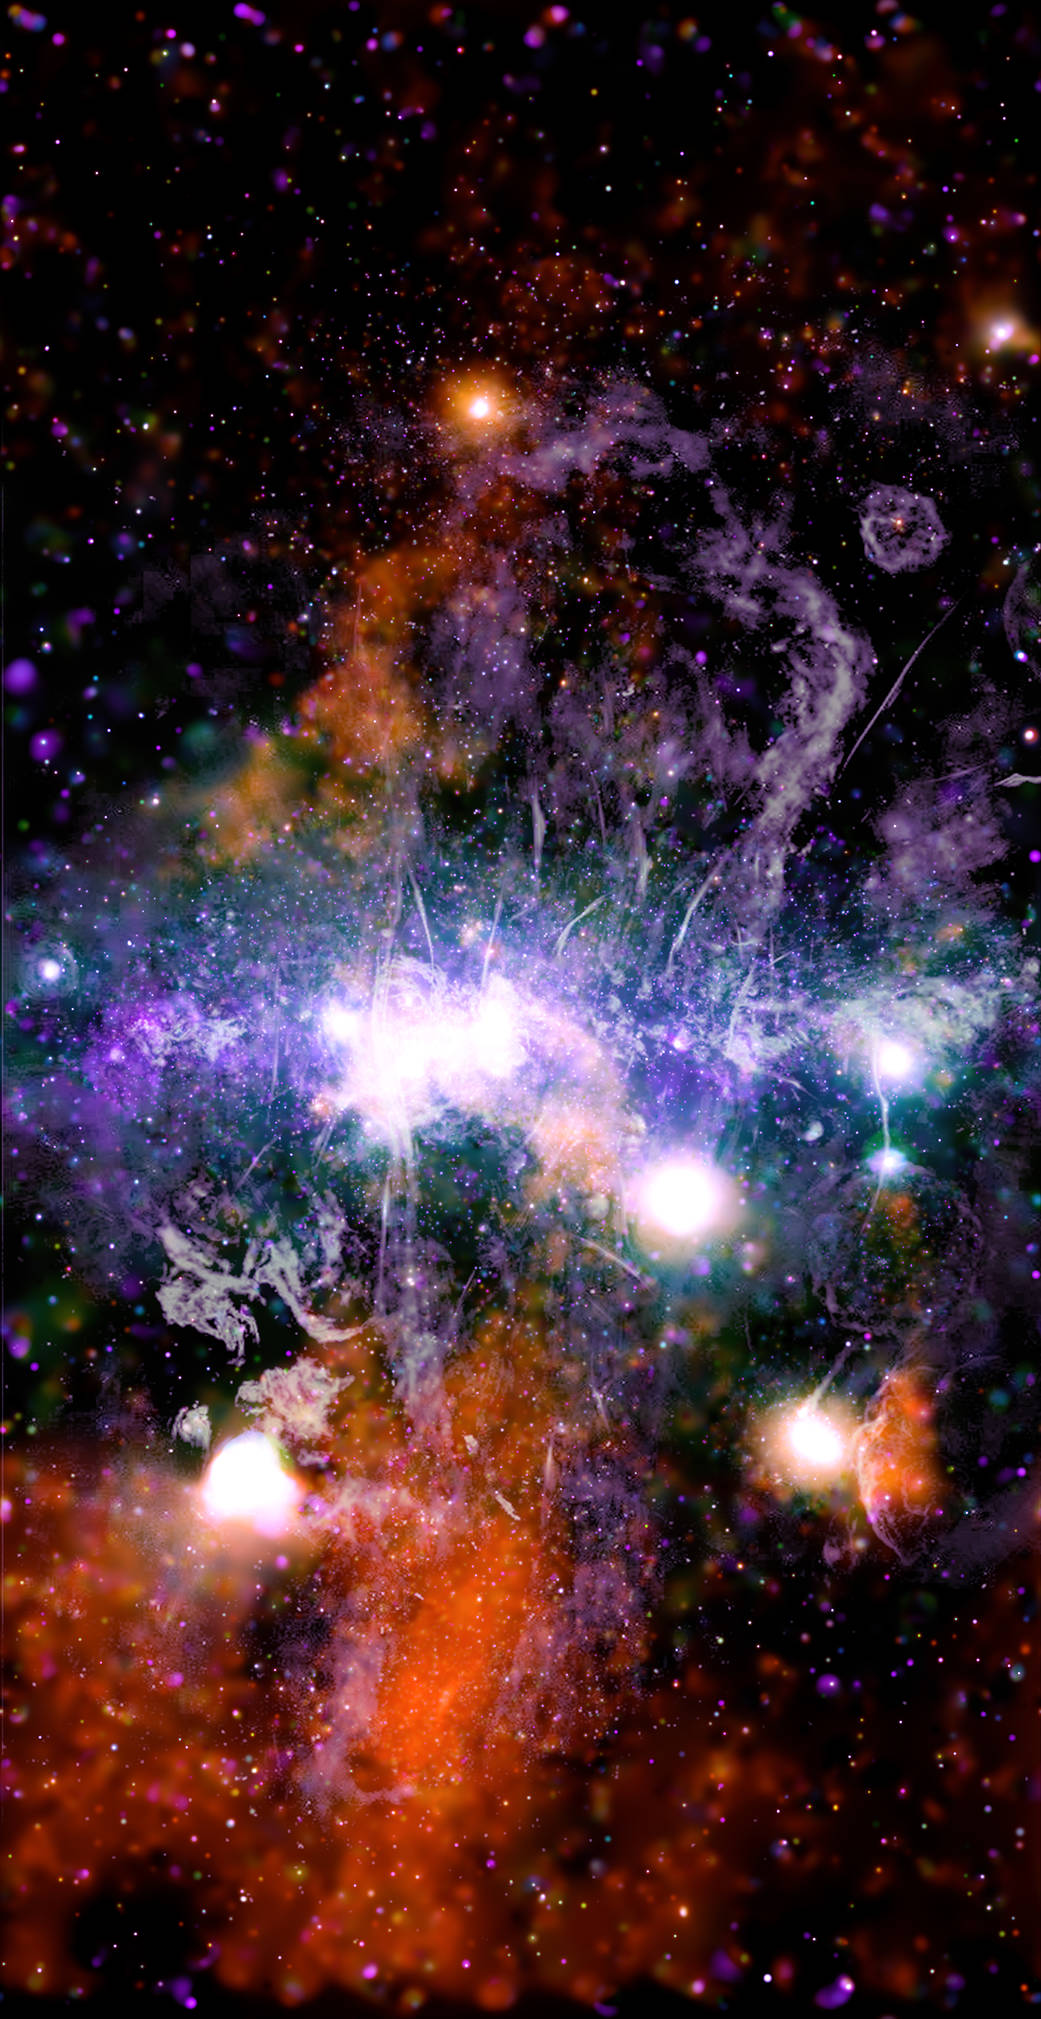 Threads of superheated gas and magnetic fields are weaving a tapestry of energy at the center of the Milky Way galaxy. A new image of this new cosmic masterpiece was made using a giant mosaic of data from NASA's Chandra X-ray Observatory and the MeerKAT radio telescope in South Africa.